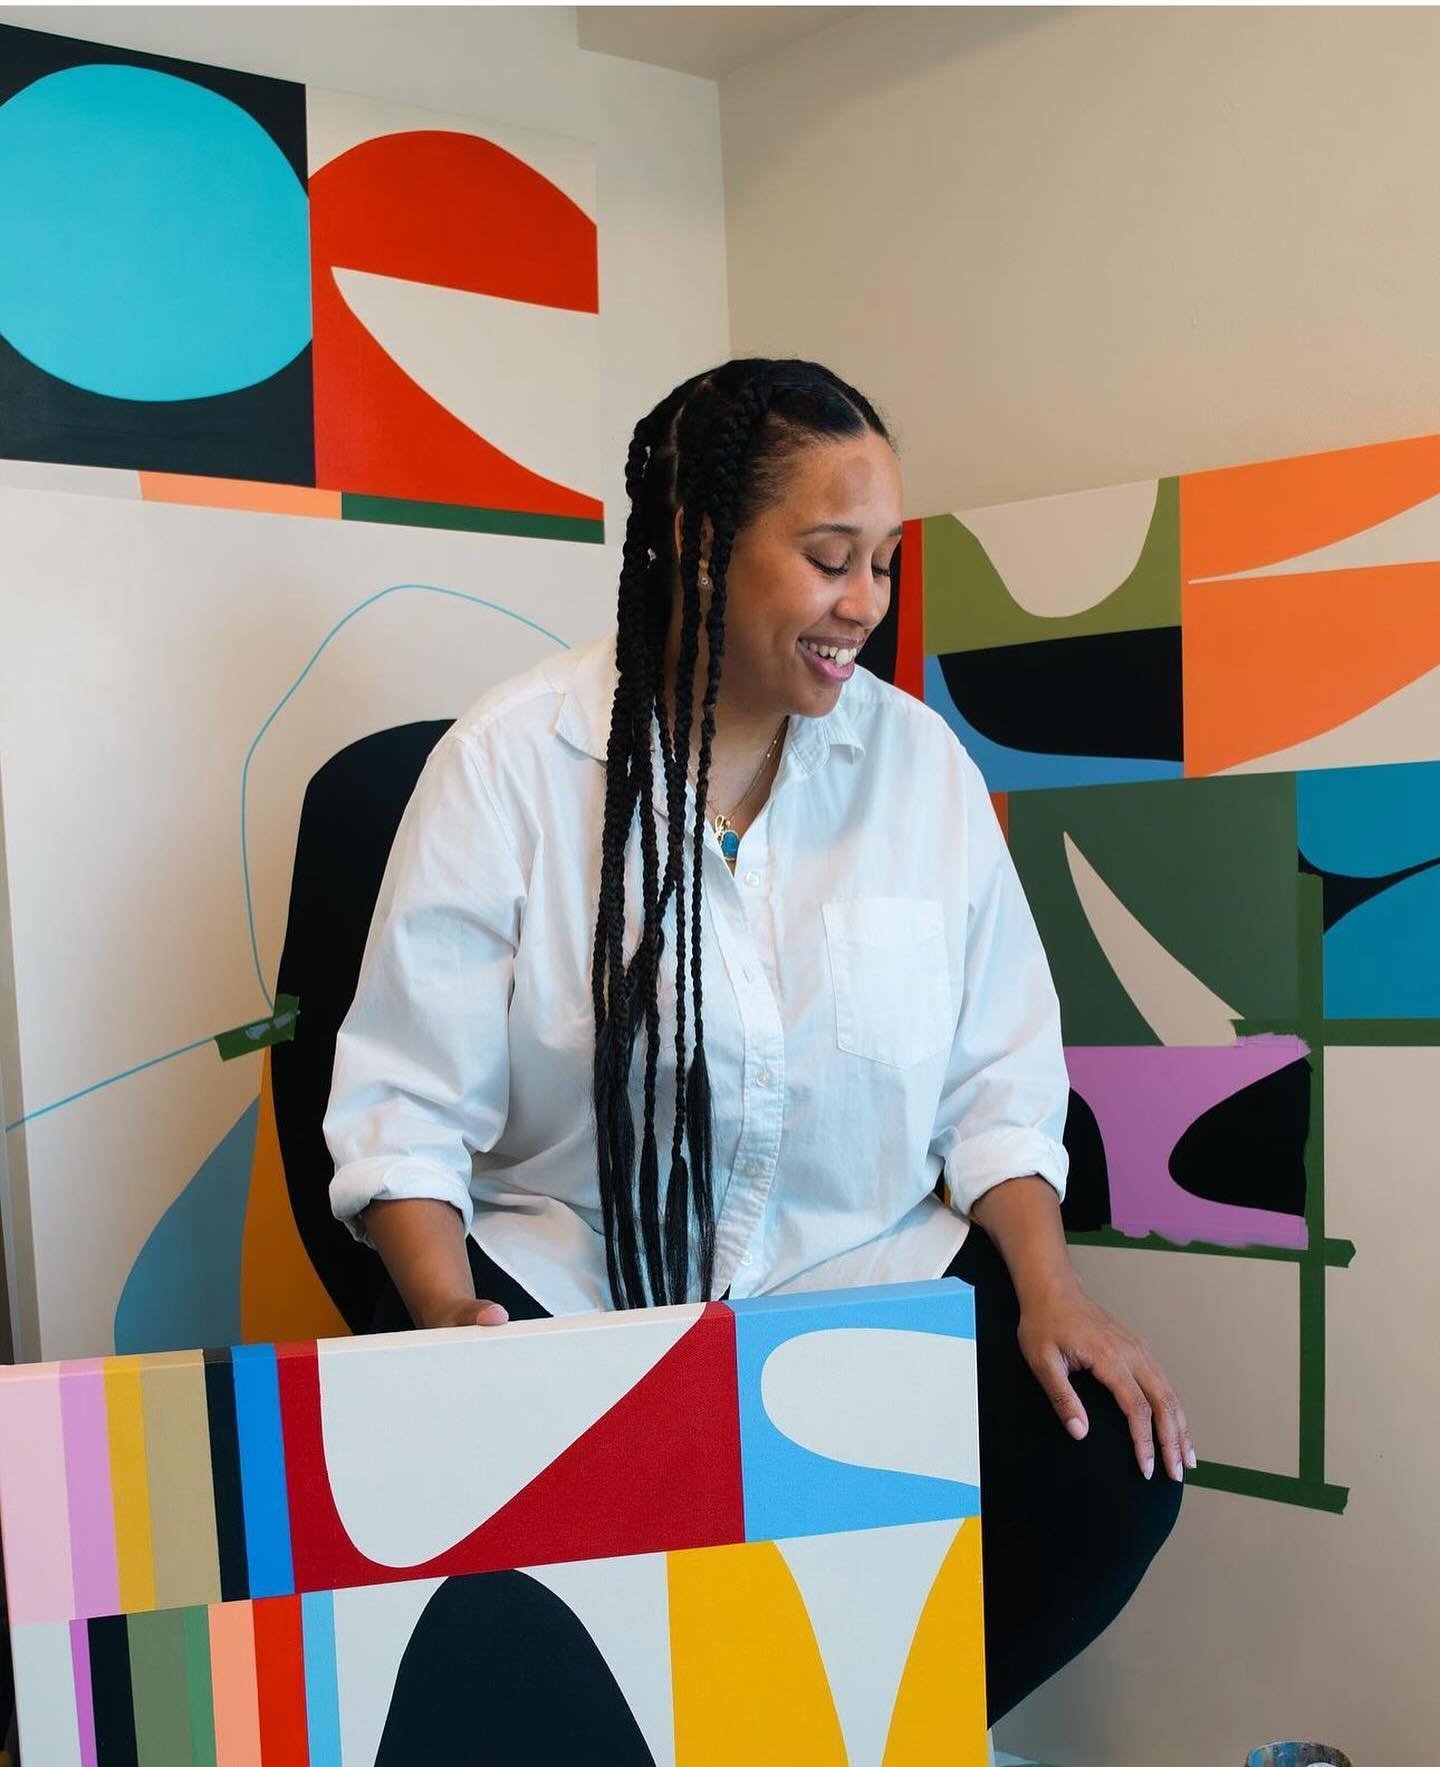 Featuring Dierdre Patterson (@deardrahpee), a self-taught artist specializing in abstract paintings and sculptures. Her intuitive process, free from pre-sketched designs or fixed color schemes, allows her artworks to unfold naturally, sparking a dial